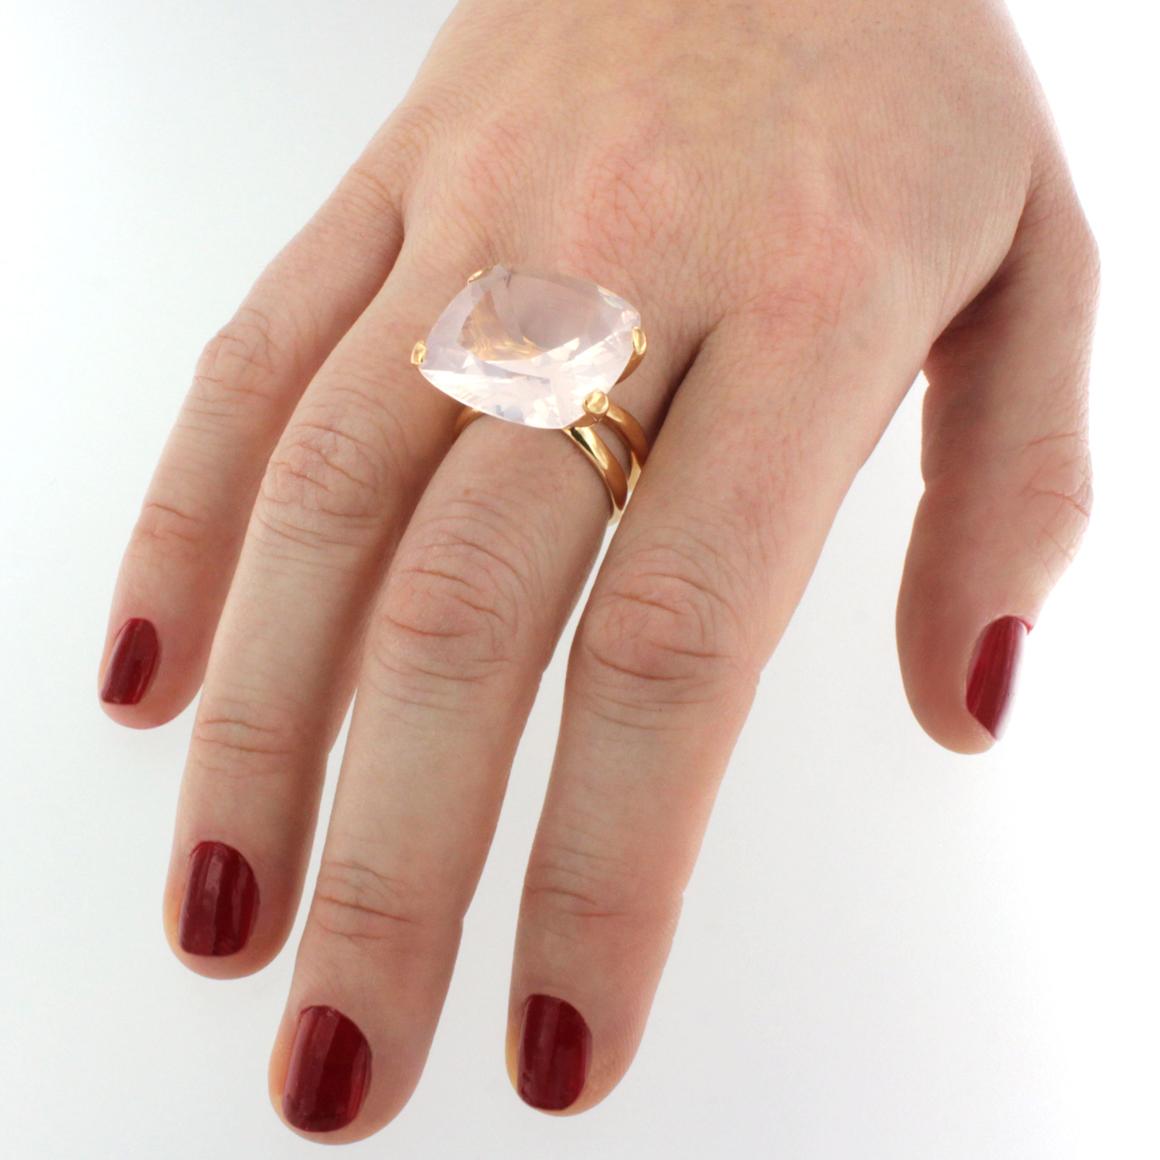 Big stone light colour for this amazing ring in 18k rose gold handemade in Italy by Stanoppi Jewellery since 1948.     Pinq Quartz (square cut, size:20x20 mm)   g.12,00

Size of ring:  15 EU - 7,5 USA 

All Stanoppi Jewelry is new and has never been